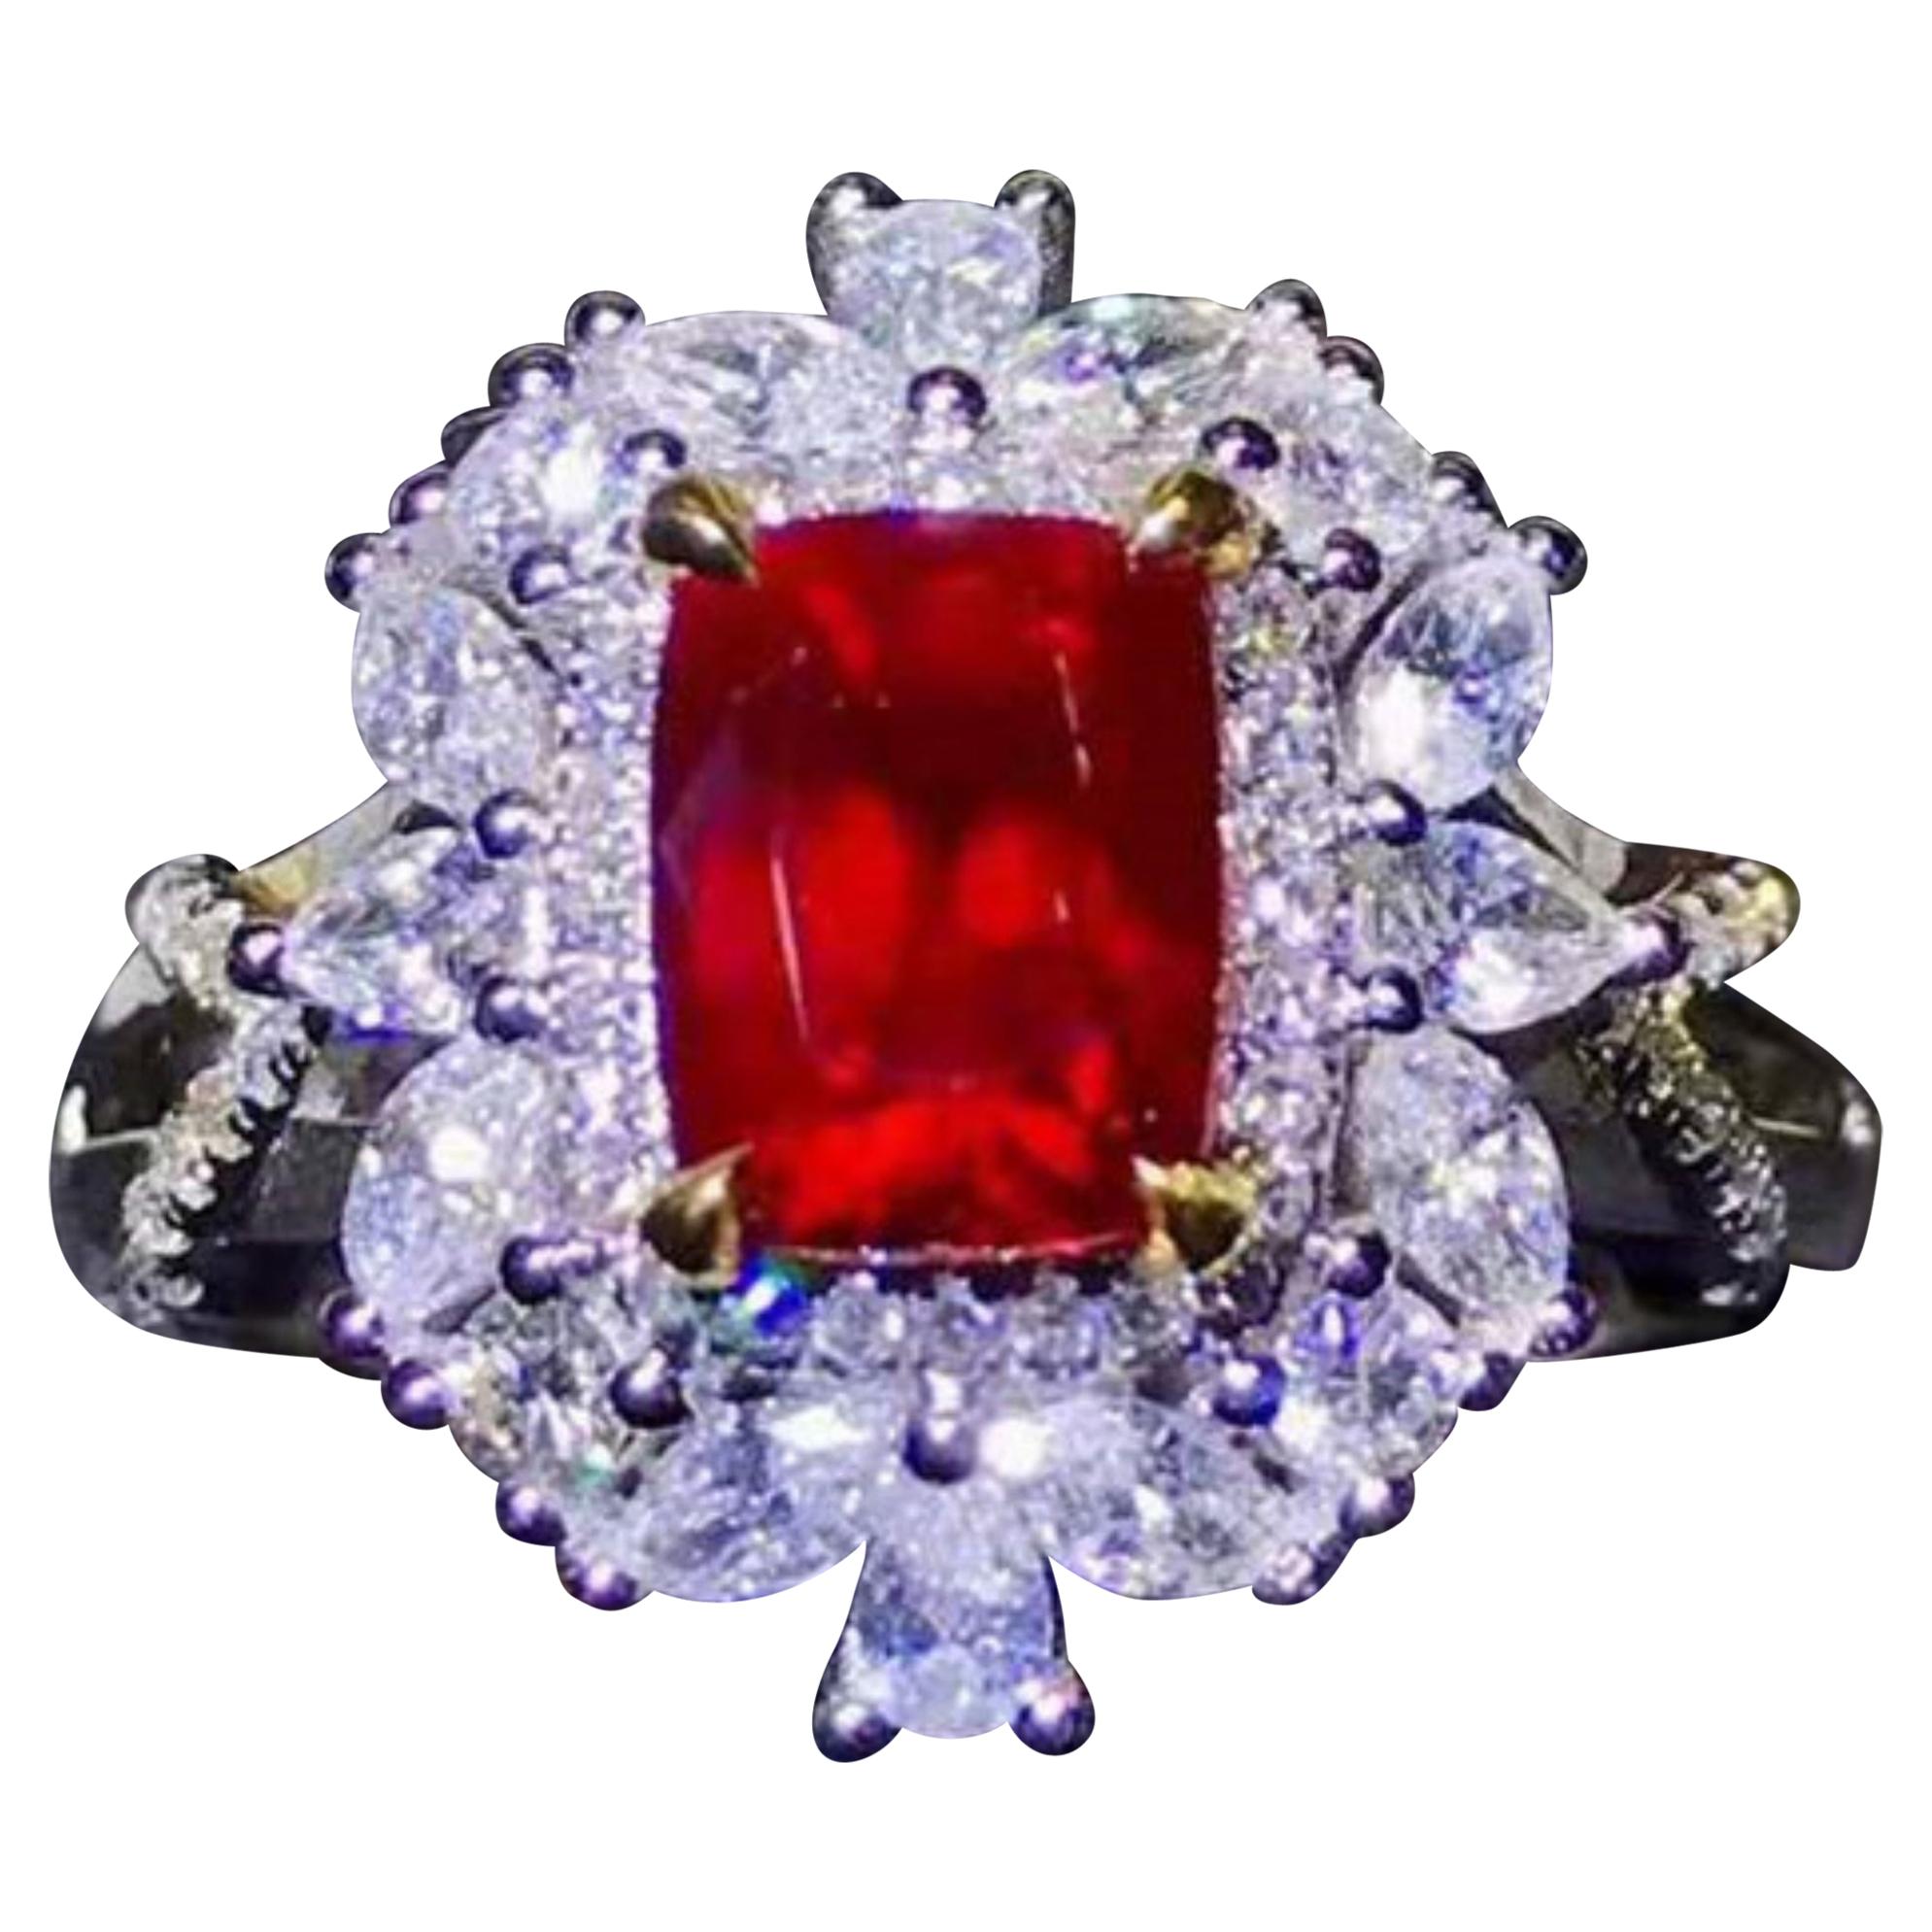 2.03 Carat Ruby Pigeon Red Blood Diamond Ring Unheated 18 Karat White Gold For Sale